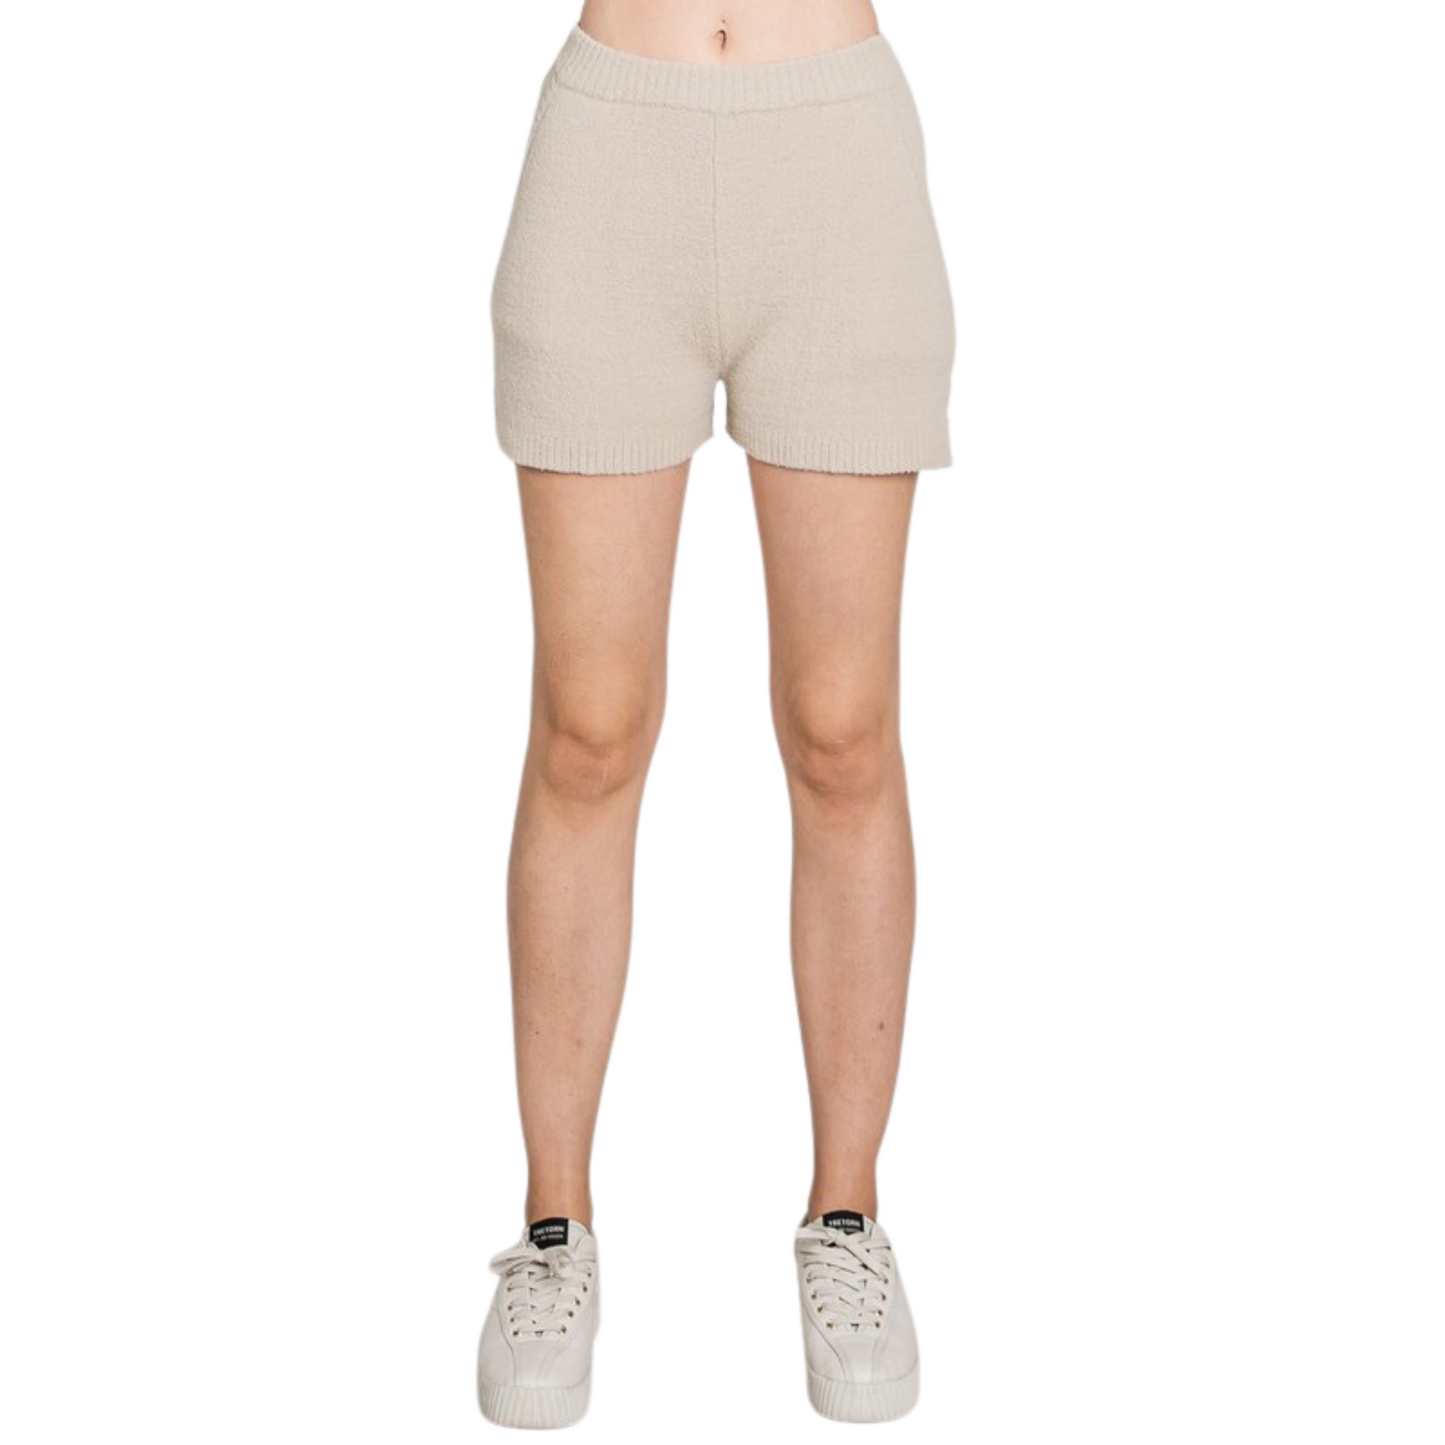 The Cloud Sweater Shorts are a must-have for your loungewear collection. Crafted from super soft fabric, these khaki shorts offer maximum comfort. Exceed your expectations for comfort and style with the Cloud Sweater Shorts.